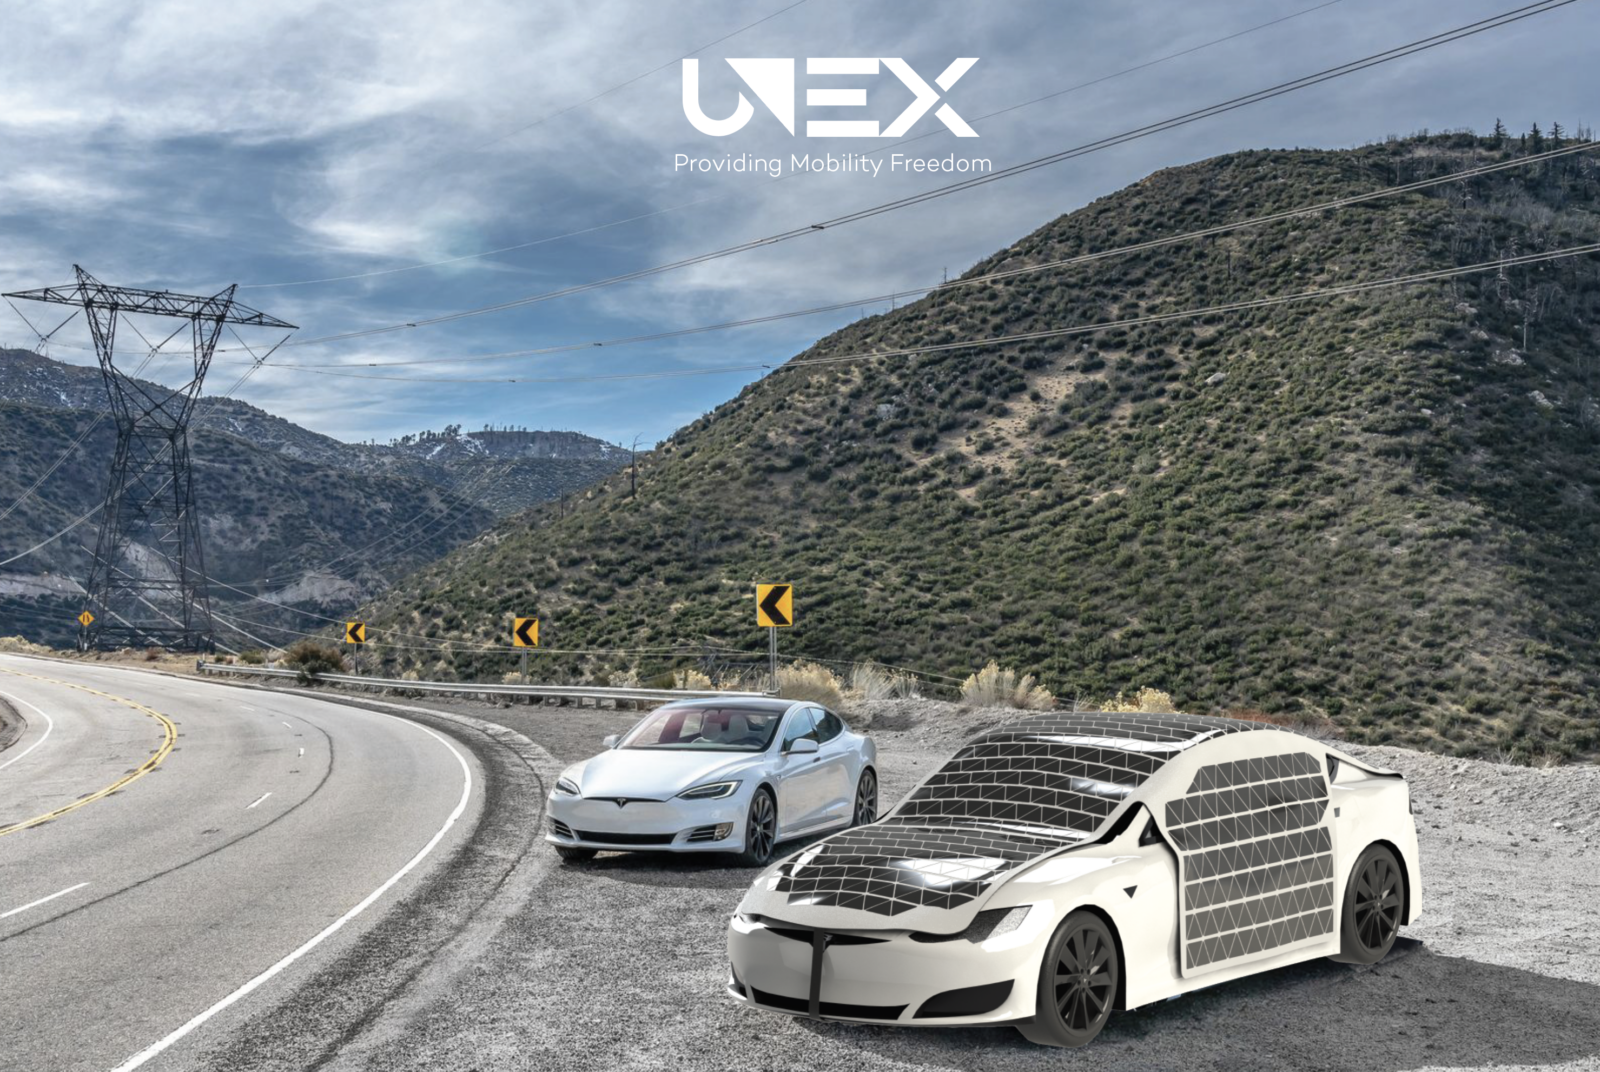 Hero render of the Uvex system deployed over a vehicle